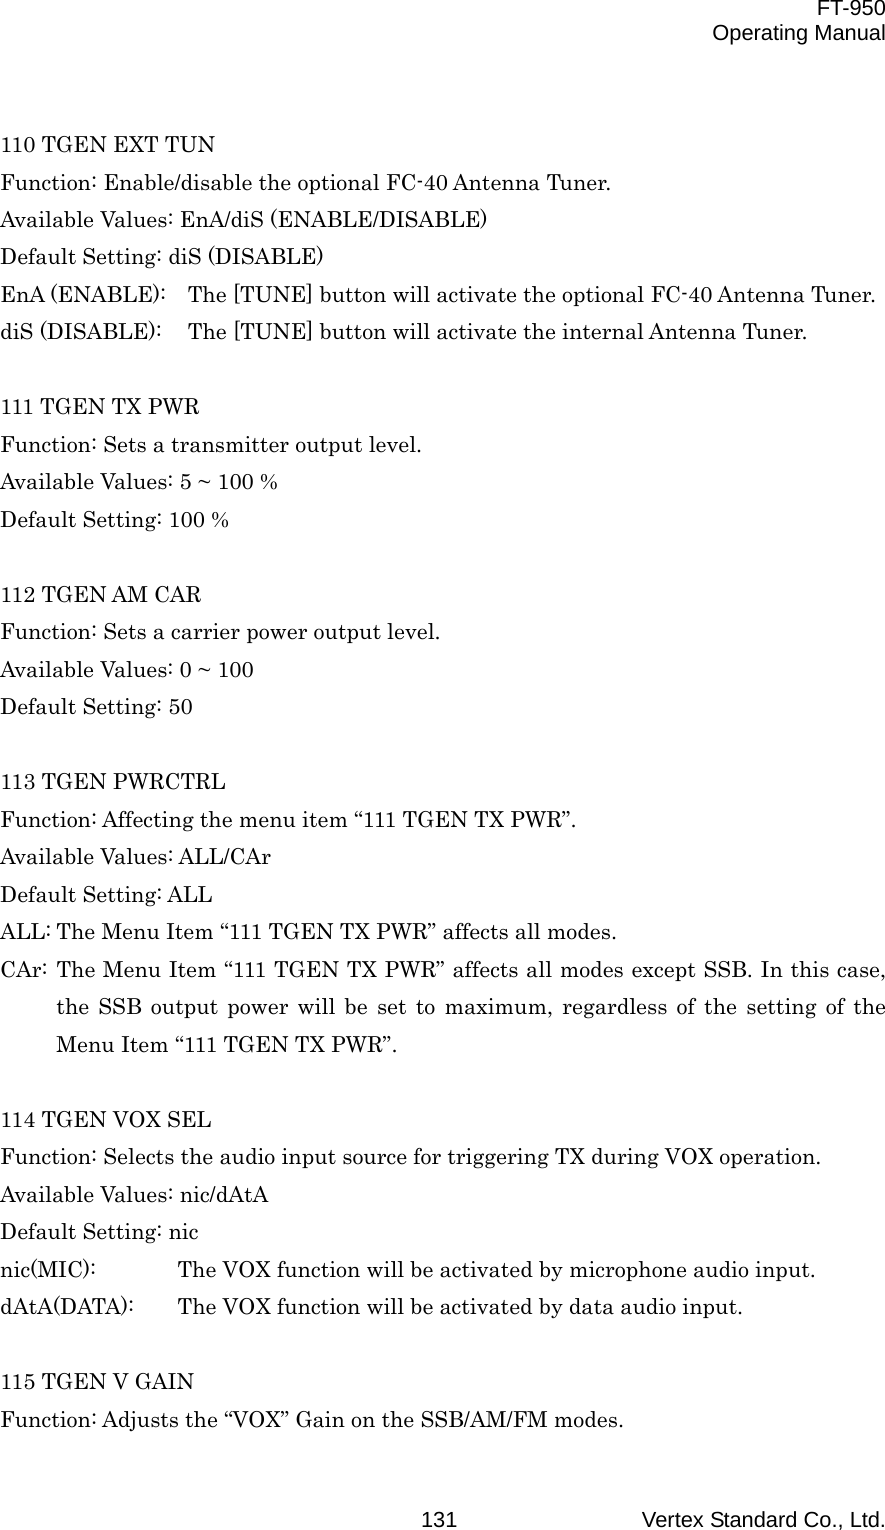  FT-950 Operating Manual Vertex Standard Co., Ltd. 131 110 TGEN EXT TUN Function: Enable/disable the optional FC-40 Antenna Tuner. Available Values: EnA/diS (ENABLE/DISABLE) Default Setting: diS (DISABLE) EnA (ENABLE):  The [TUNE] button will activate the optional FC-40 Antenna Tuner. diS (DISABLE):  The [TUNE] button will activate the internal Antenna Tuner.  111 TGEN TX PWR Function: Sets a transmitter output level. Available Values: 5 ~ 100 % Default Setting: 100 %  112 TGEN AM CAR Function: Sets a carrier power output level. Available Values: 0 ~ 100 Default Setting: 50  113 TGEN PWRCTRL Function: Affecting the menu item “111 TGEN TX PWR”. Available Values: ALL/CAr Default Setting: ALL ALL: The Menu Item “111 TGEN TX PWR” affects all modes. CAr: The Menu Item “111 TGEN TX PWR” affects all modes except SSB. In this case, the SSB output power will be set to maximum, regardless of the setting of the Menu Item “111 TGEN TX PWR”.  114 TGEN VOX SEL Function: Selects the audio input source for triggering TX during VOX operation. Available Values: nic/dAtA Default Setting: nic nic(MIC):  The VOX function will be activated by microphone audio input. dAtA(DATA):  The VOX function will be activated by data audio input.  115 TGEN V GAIN Function: Adjusts the “VOX” Gain on the SSB/AM/FM modes. 